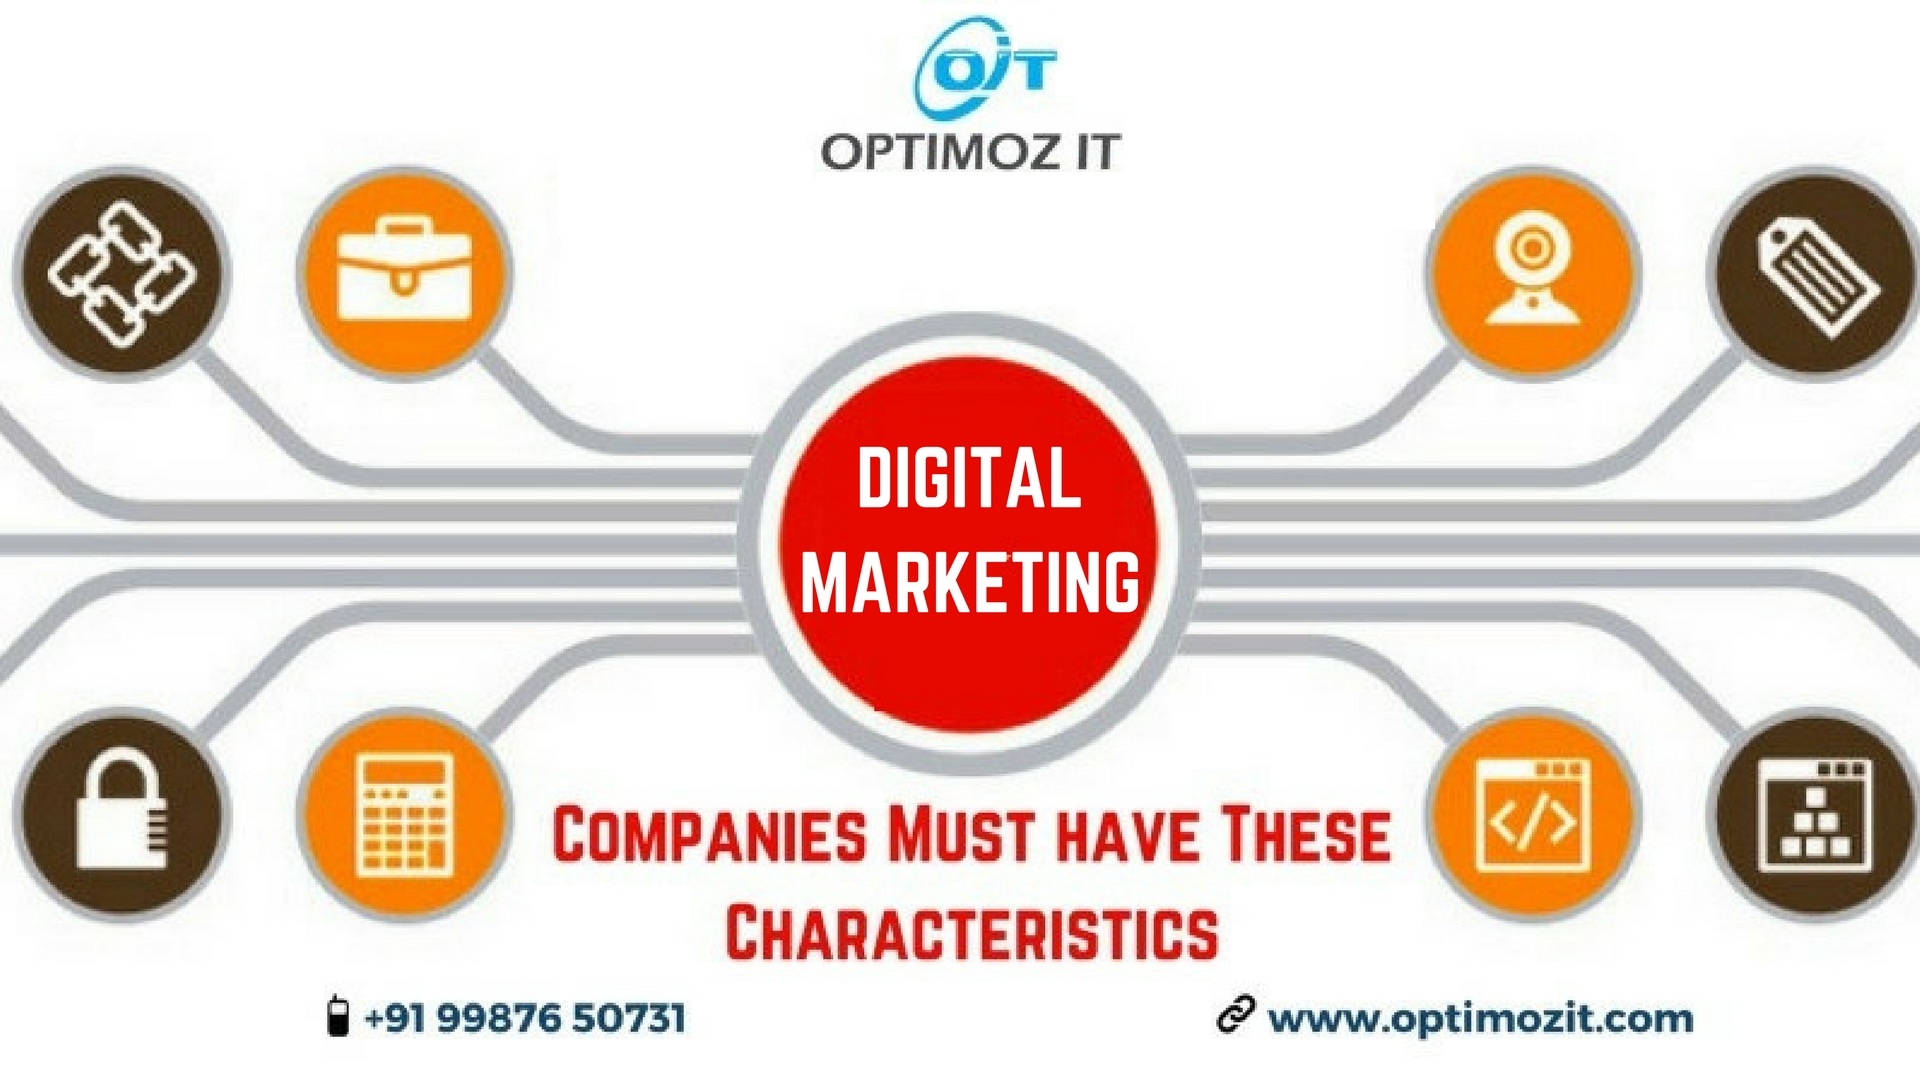 Digital Marketing Companies Must Have These Characteristics